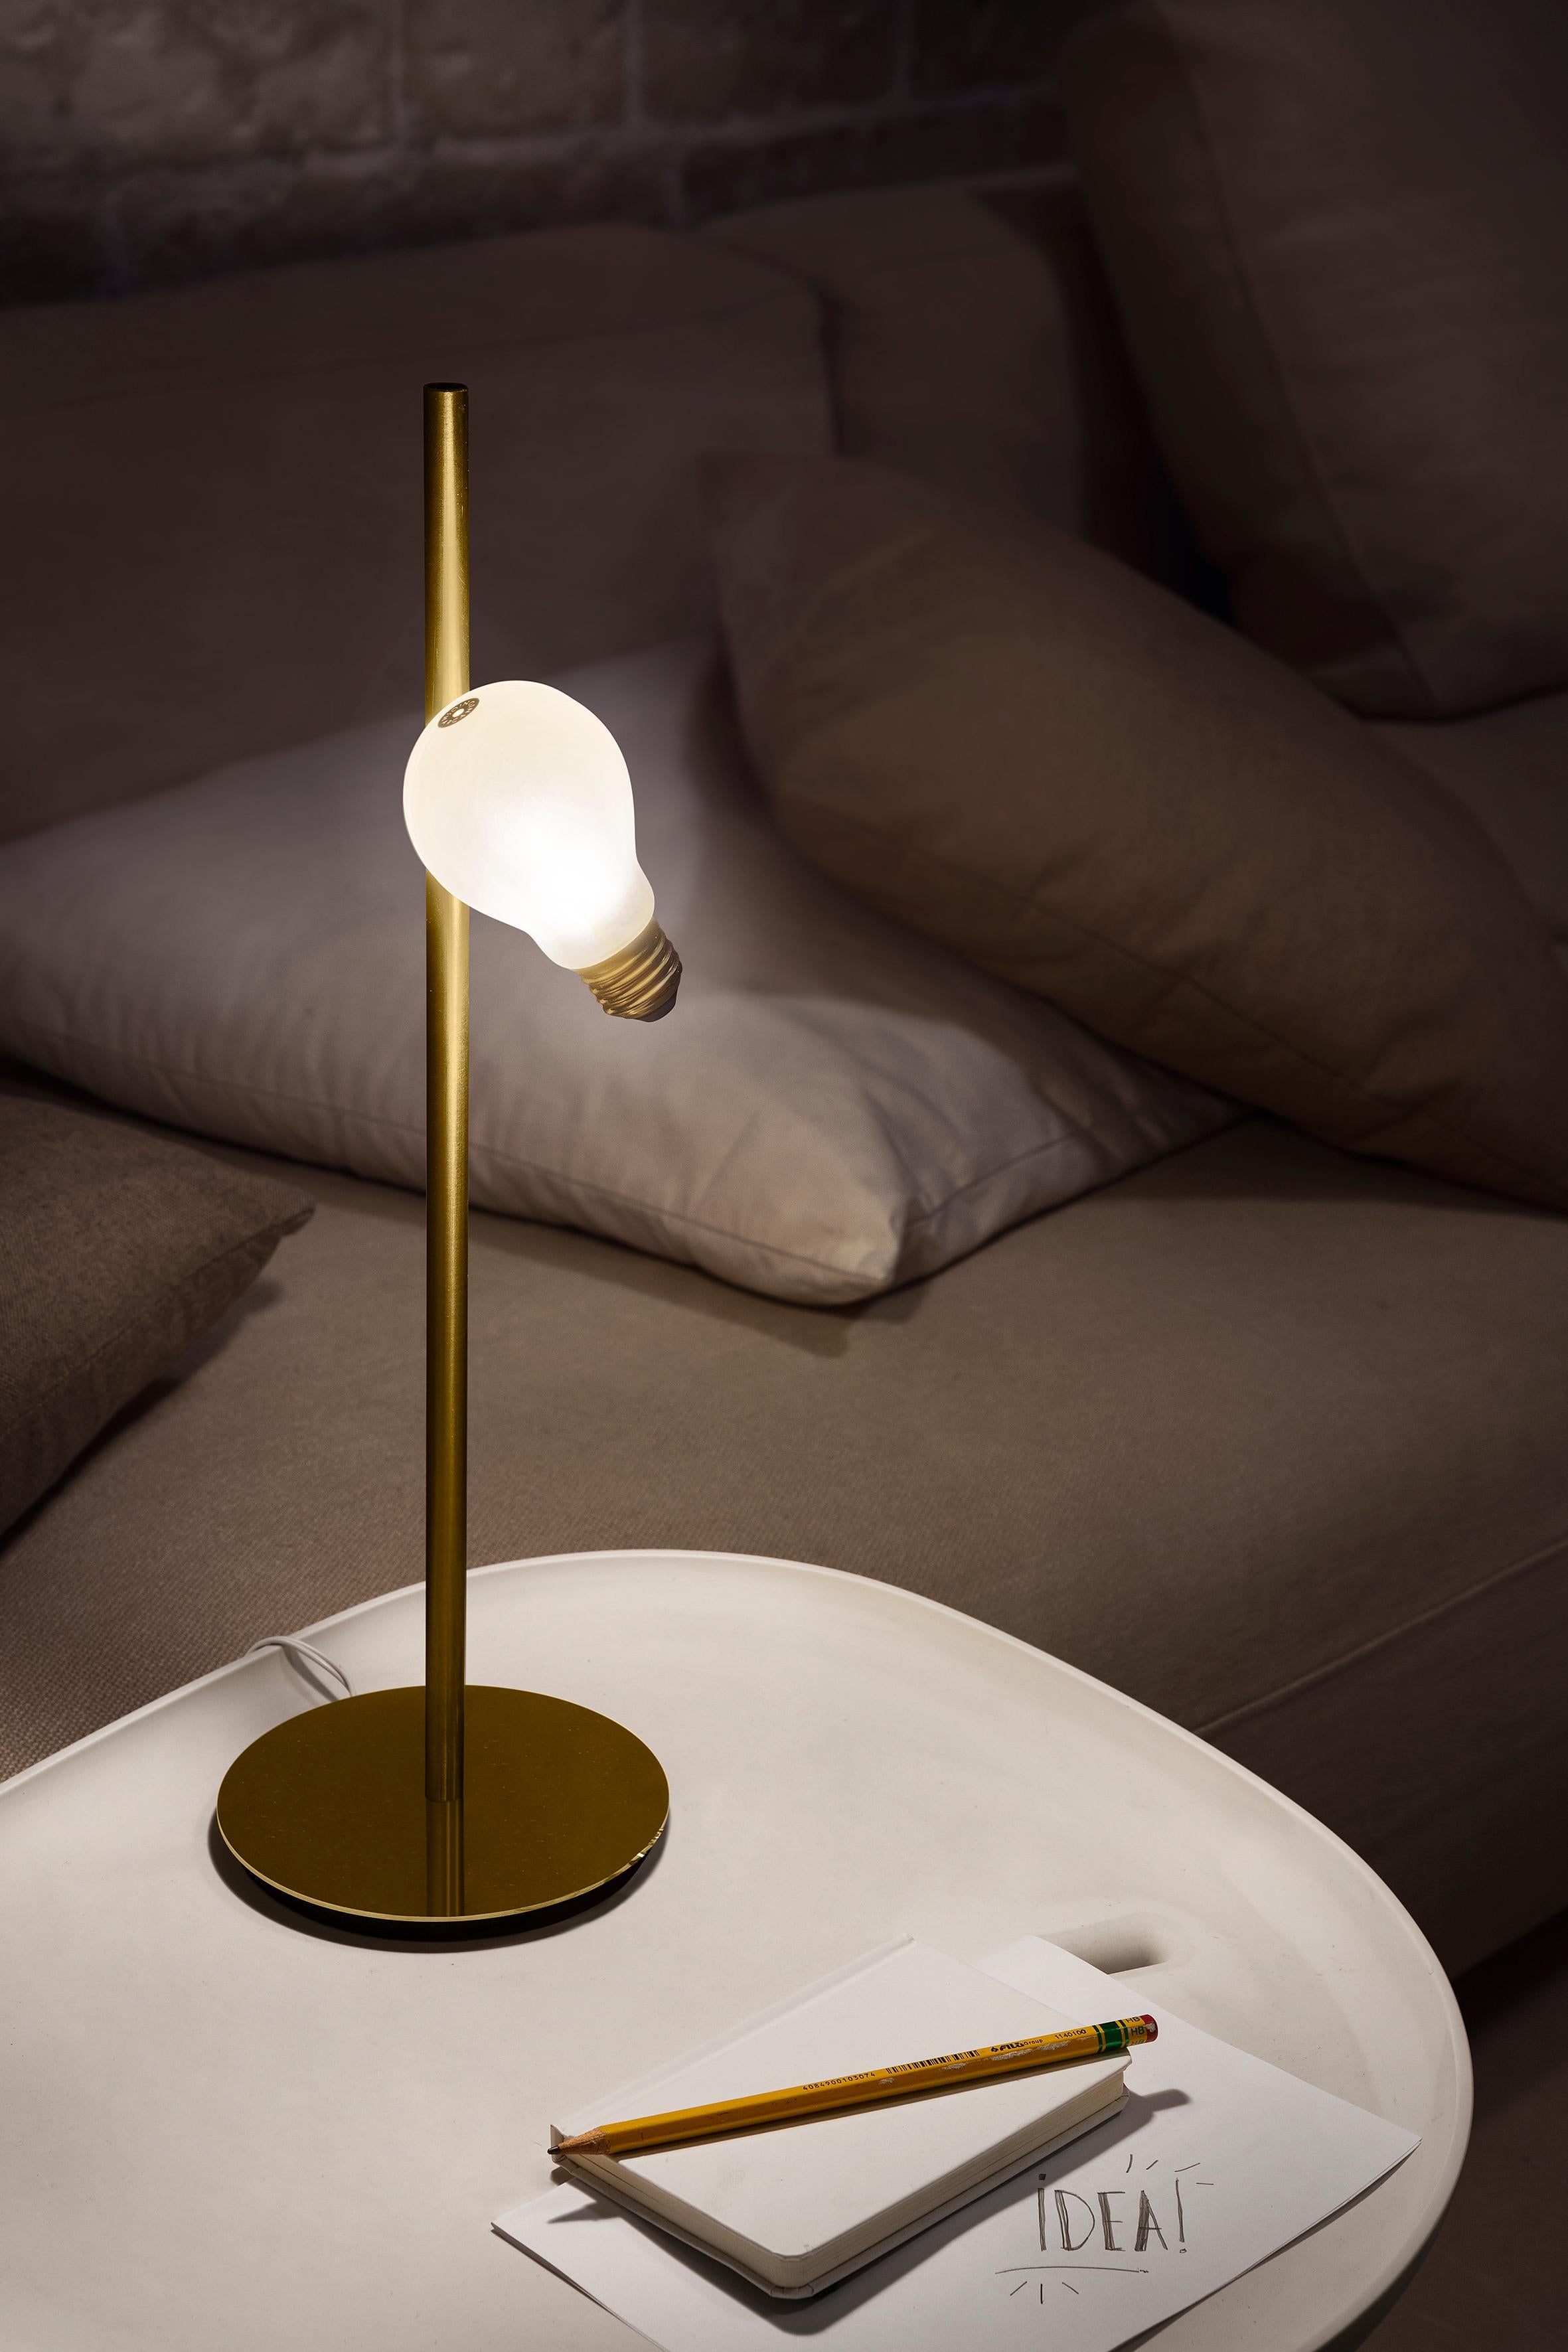 They say inspiration comes on like a lightbulb going off in your head. Idea strips away design, leaving the essence of light; a three-dimensional “bulb” and a brass-finish screw base, magically suspended on a wall-base that comes in a brushed brass,